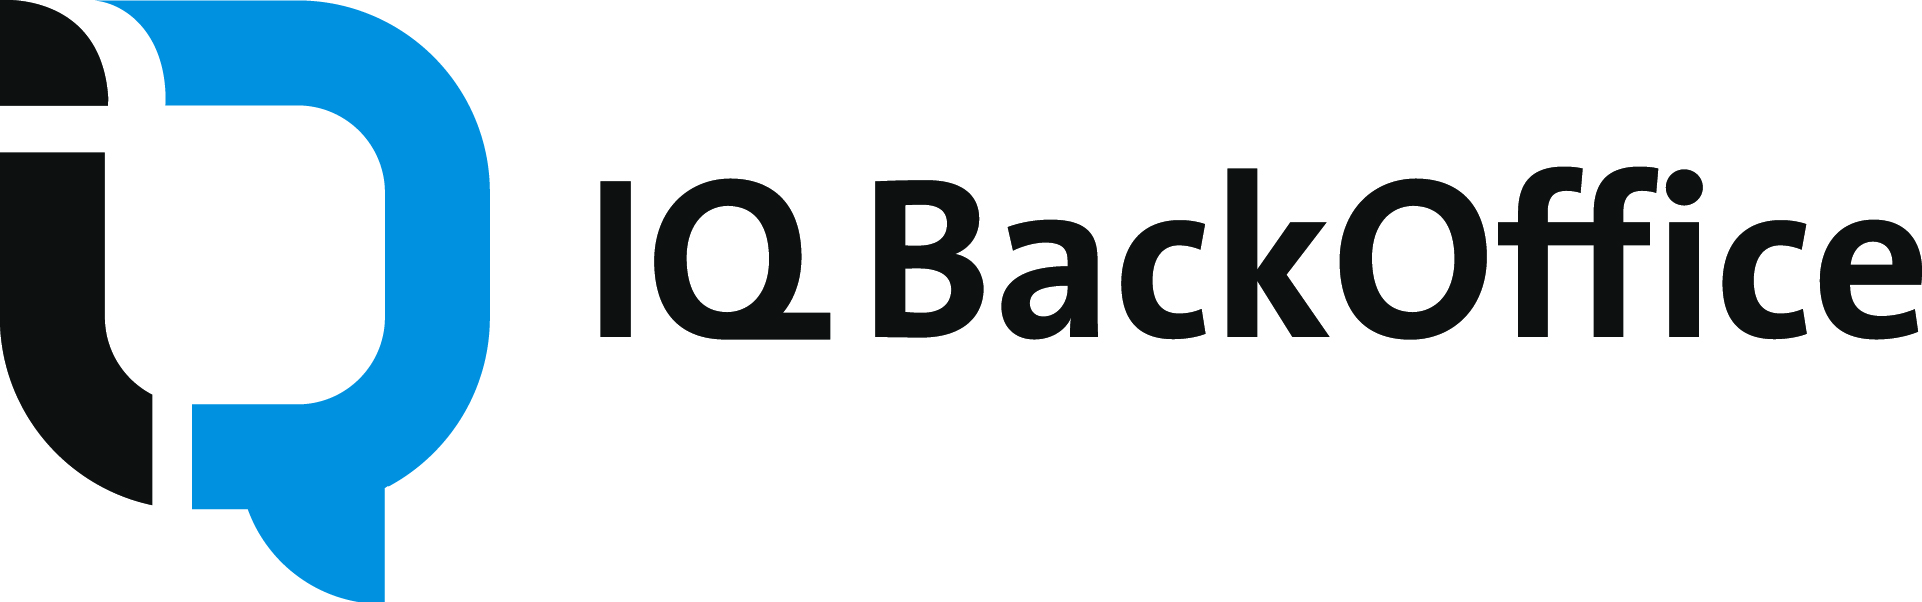 Iq Backoffice Leaders In Financial Process Automation And Outsourcing